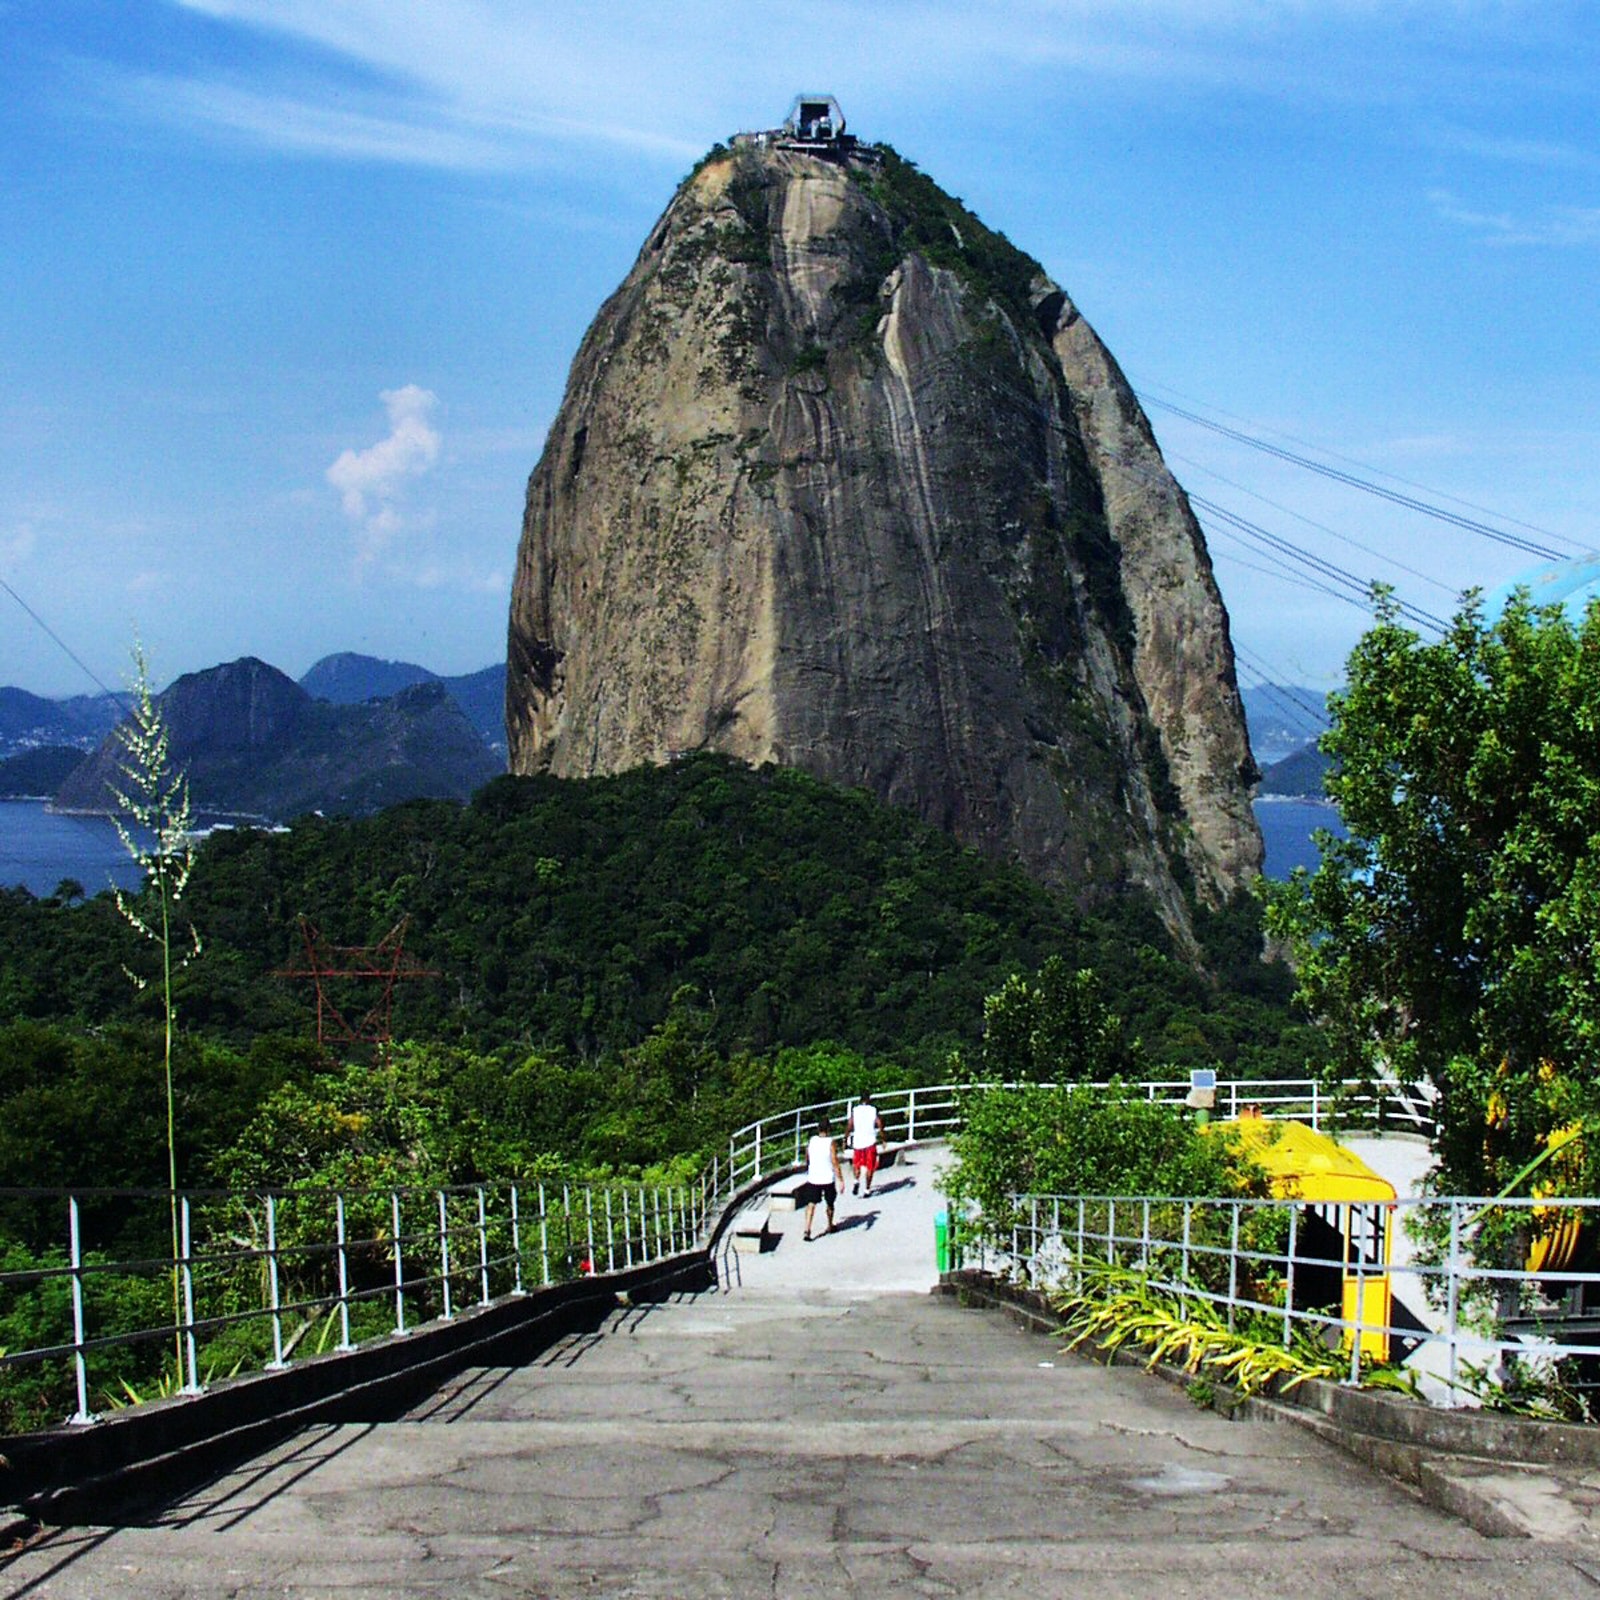 Sugarloaf City Tour & Cable Car Tour in Brazil